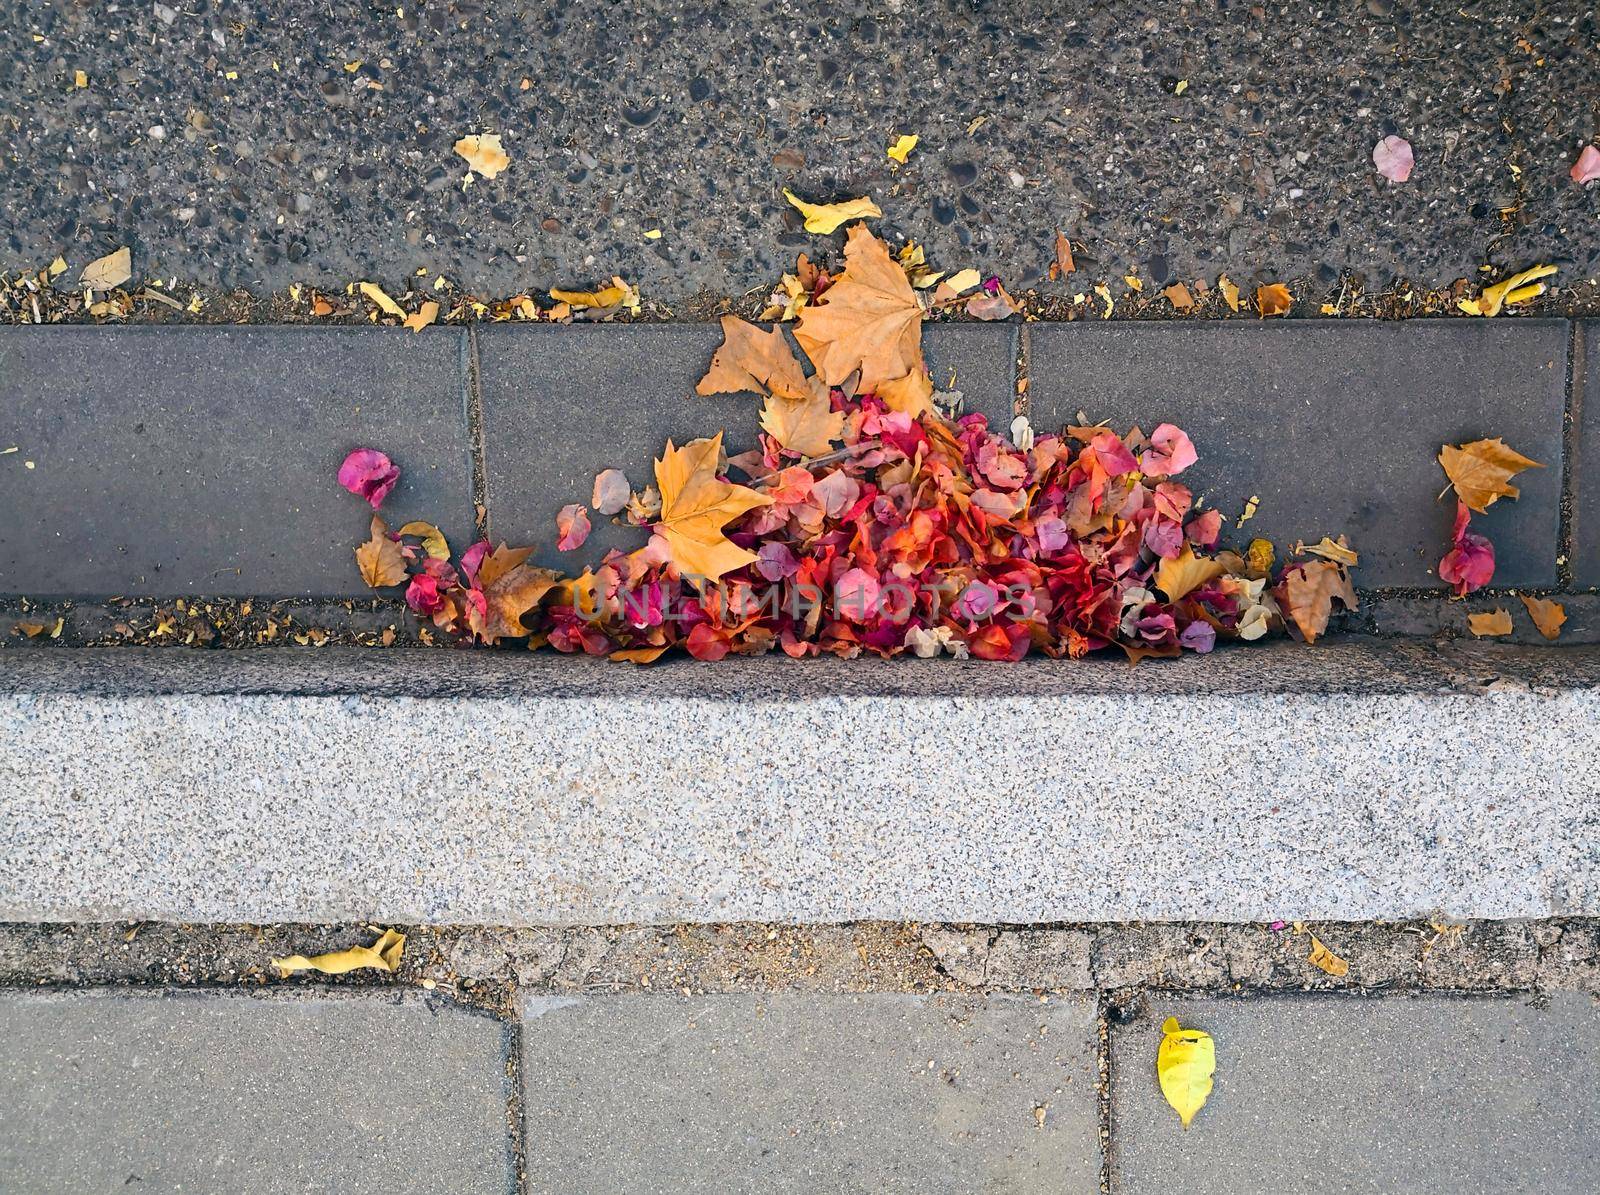 Autumn leaves and flowers near the curb of the road by Bezdnatm